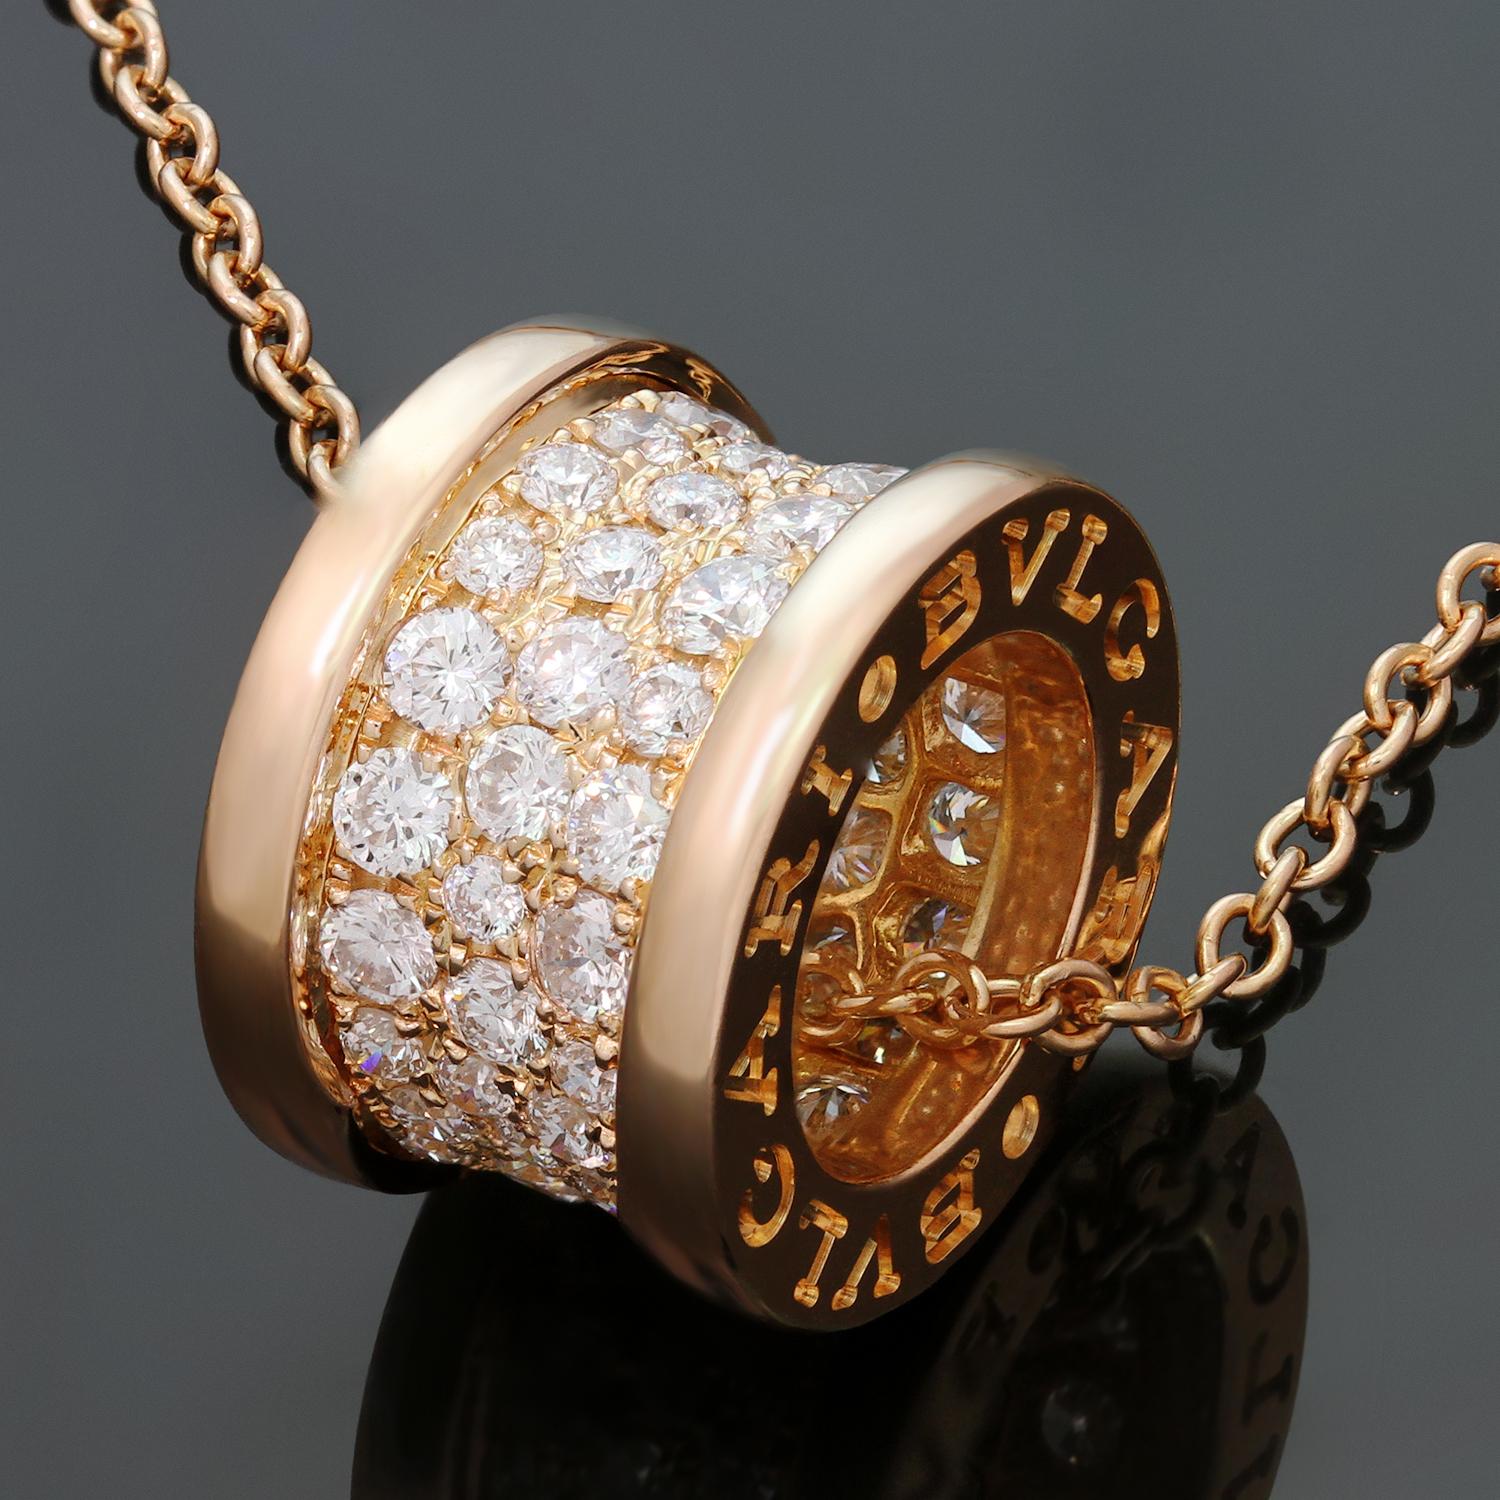 This gorgeous necklace from Bulgari's iconic B.zero1 collection is crafted 18k rose gold and completed with a BVLGARI inscribed band pendant pave-set with brilliant-cut round diamonds. Made in Italy circa 2010s. Measurements: 0.38